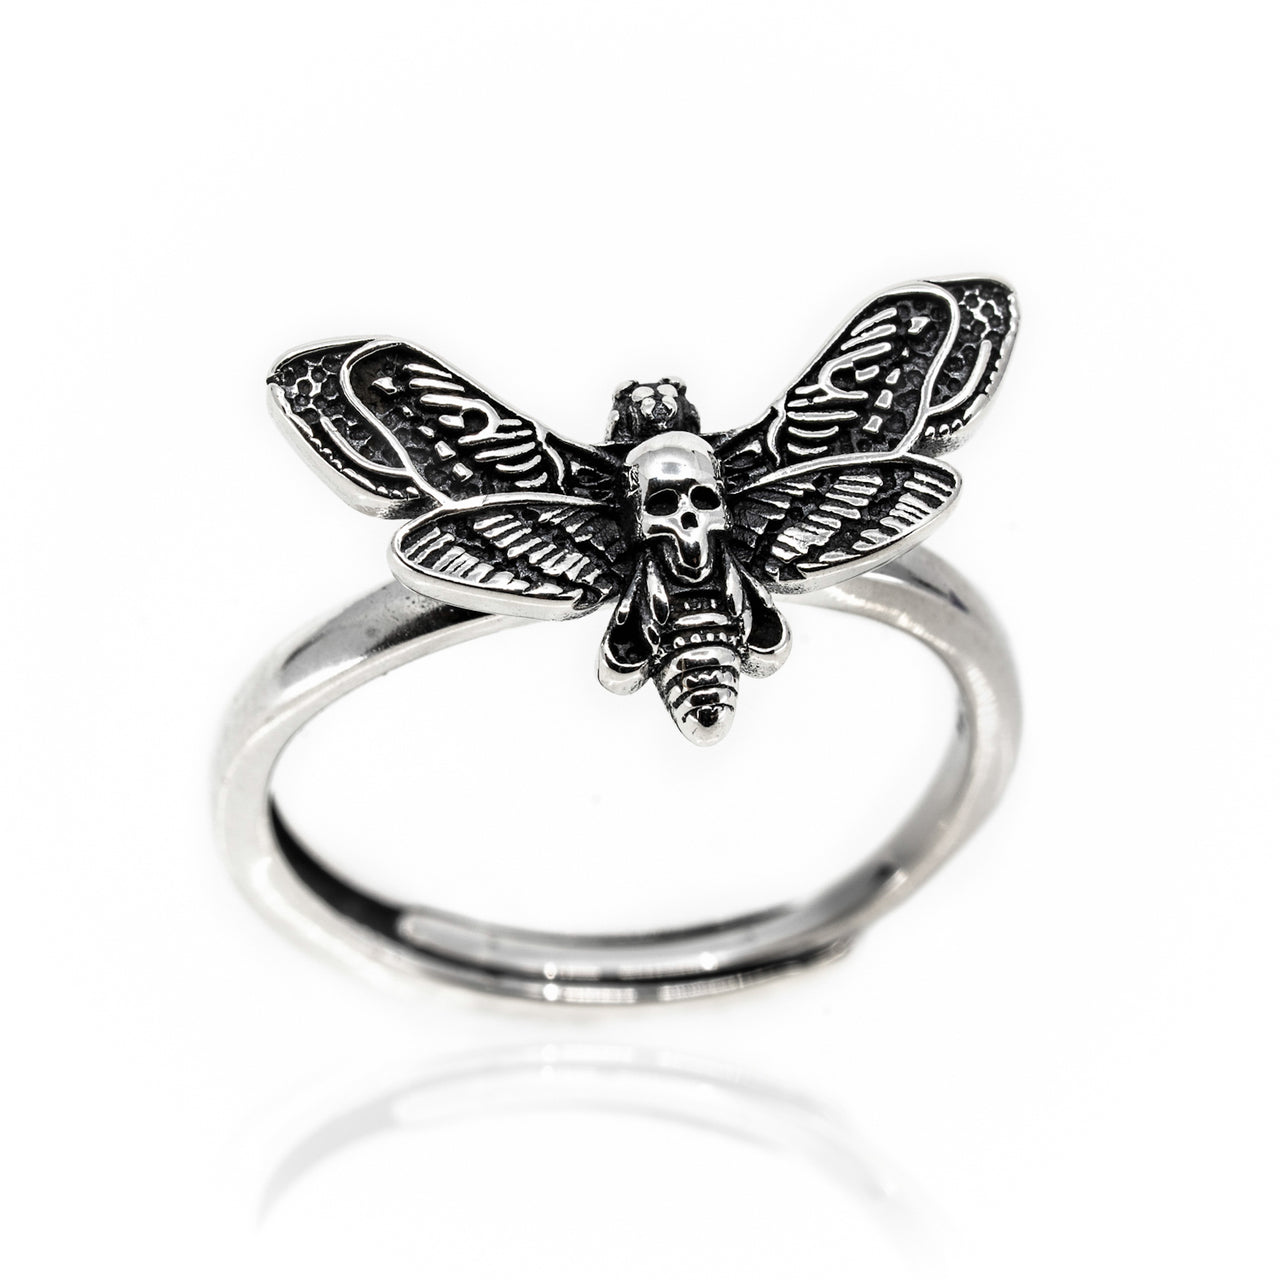 Death's Head Moth Ring - Sterling Silver - Gothic Ring